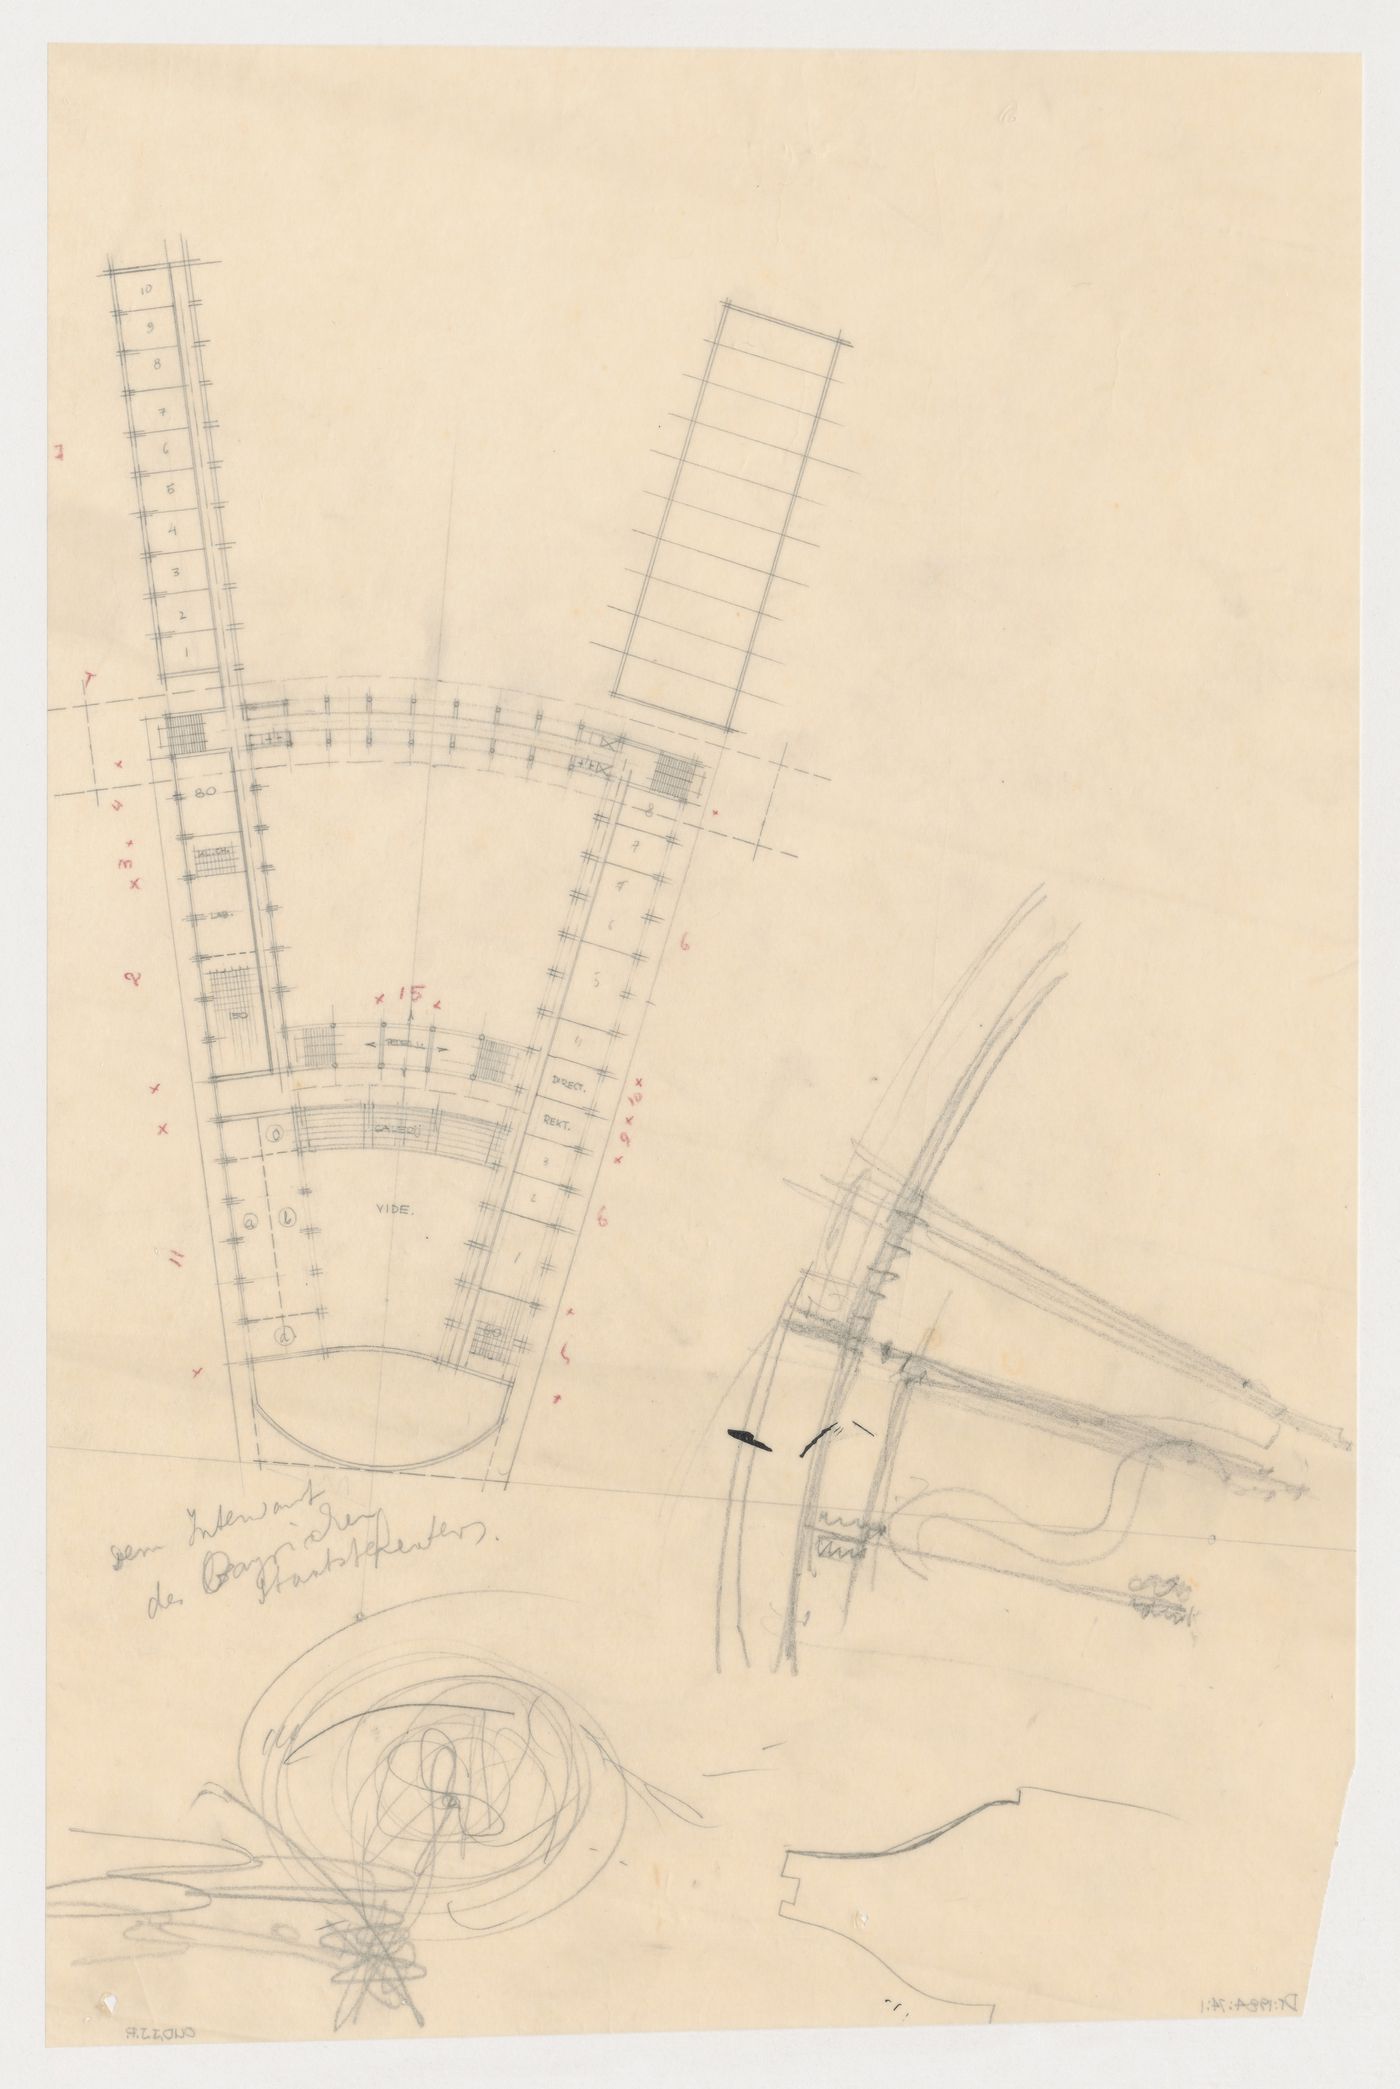 Plan and sketch plan for the 1926 design for People's University, Rotterdam, Netherlands